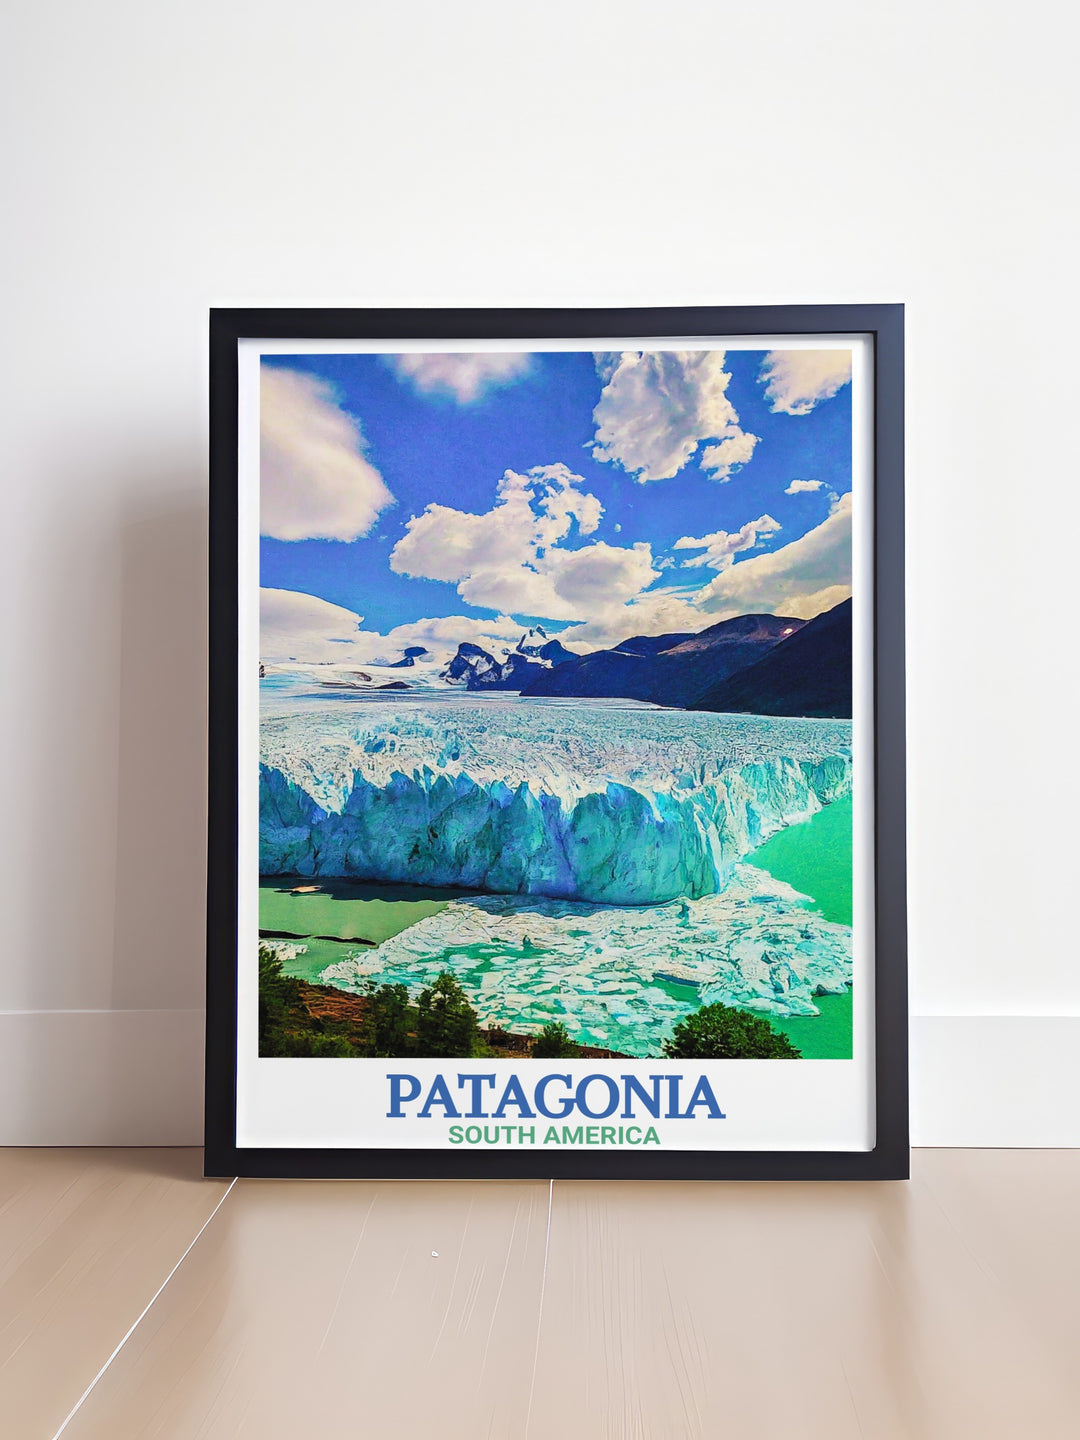 Framed print of Torres Del Paine National Park with views of the Cuernos Del Paine and guanacos. Complemented by Perito Moreno Glacier artwork perfect for home decor. A must have for those who love South American landscapes.